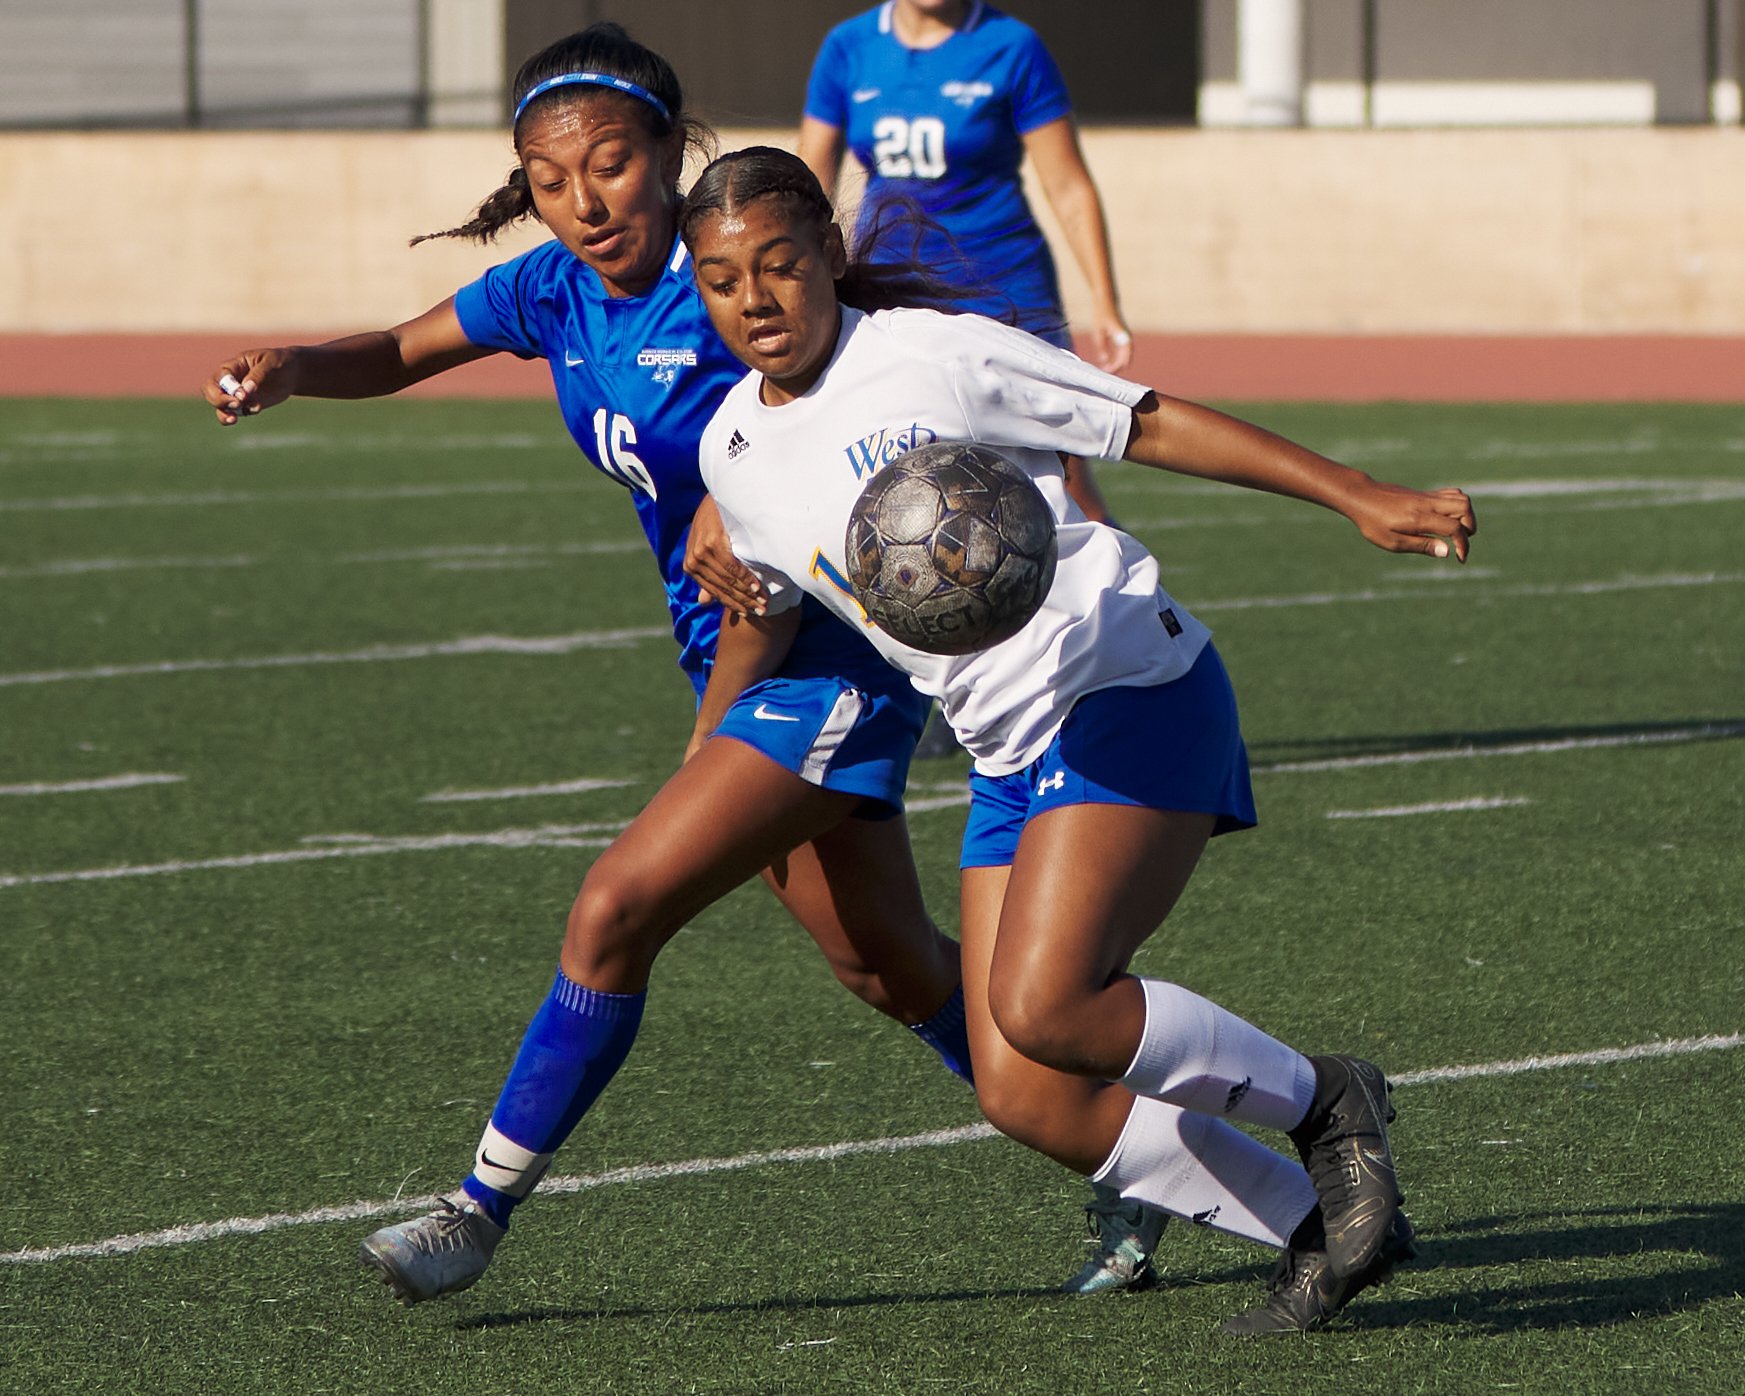  Santa Monica College Corsairs' Diana Gaspar and West Los Angeles College Wildcats' Amarah Martinez at the women's soccer match on Friday, Sept. 30, 2022, at Corsair Field in Santa Monica, Calif. The Corsairs won 3-2. (Nicholas McCall | The Corsair) 